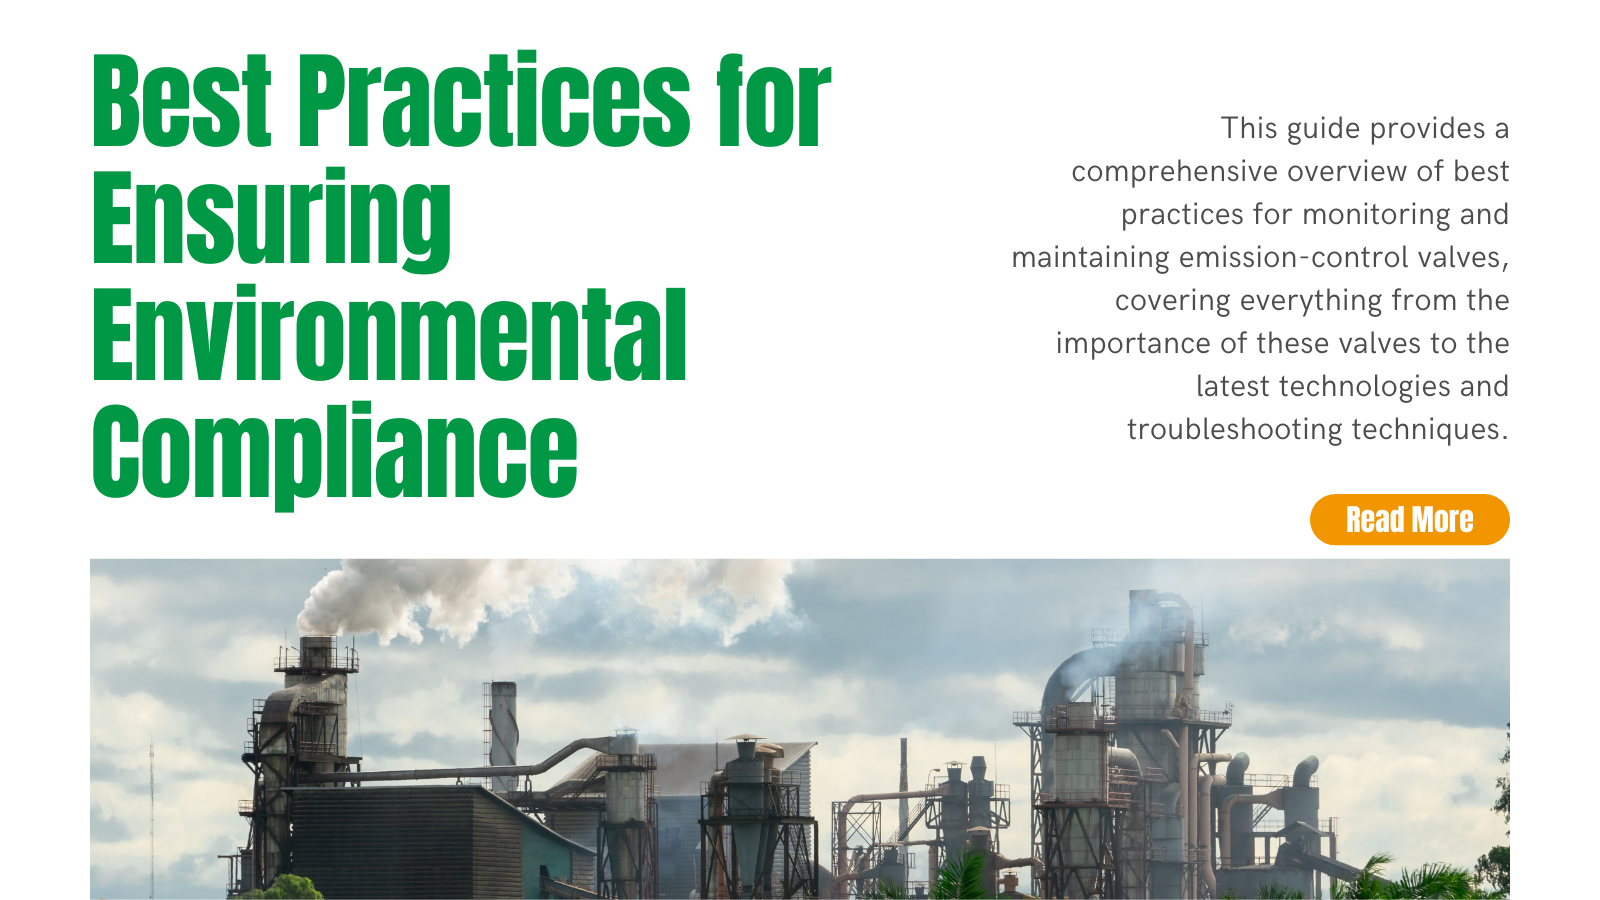 The Ultimate Guide to Monitoring and Maintaining Emission-Control Valves: Best Practices for Ensuring Environmental Compliance | INOX-TEK